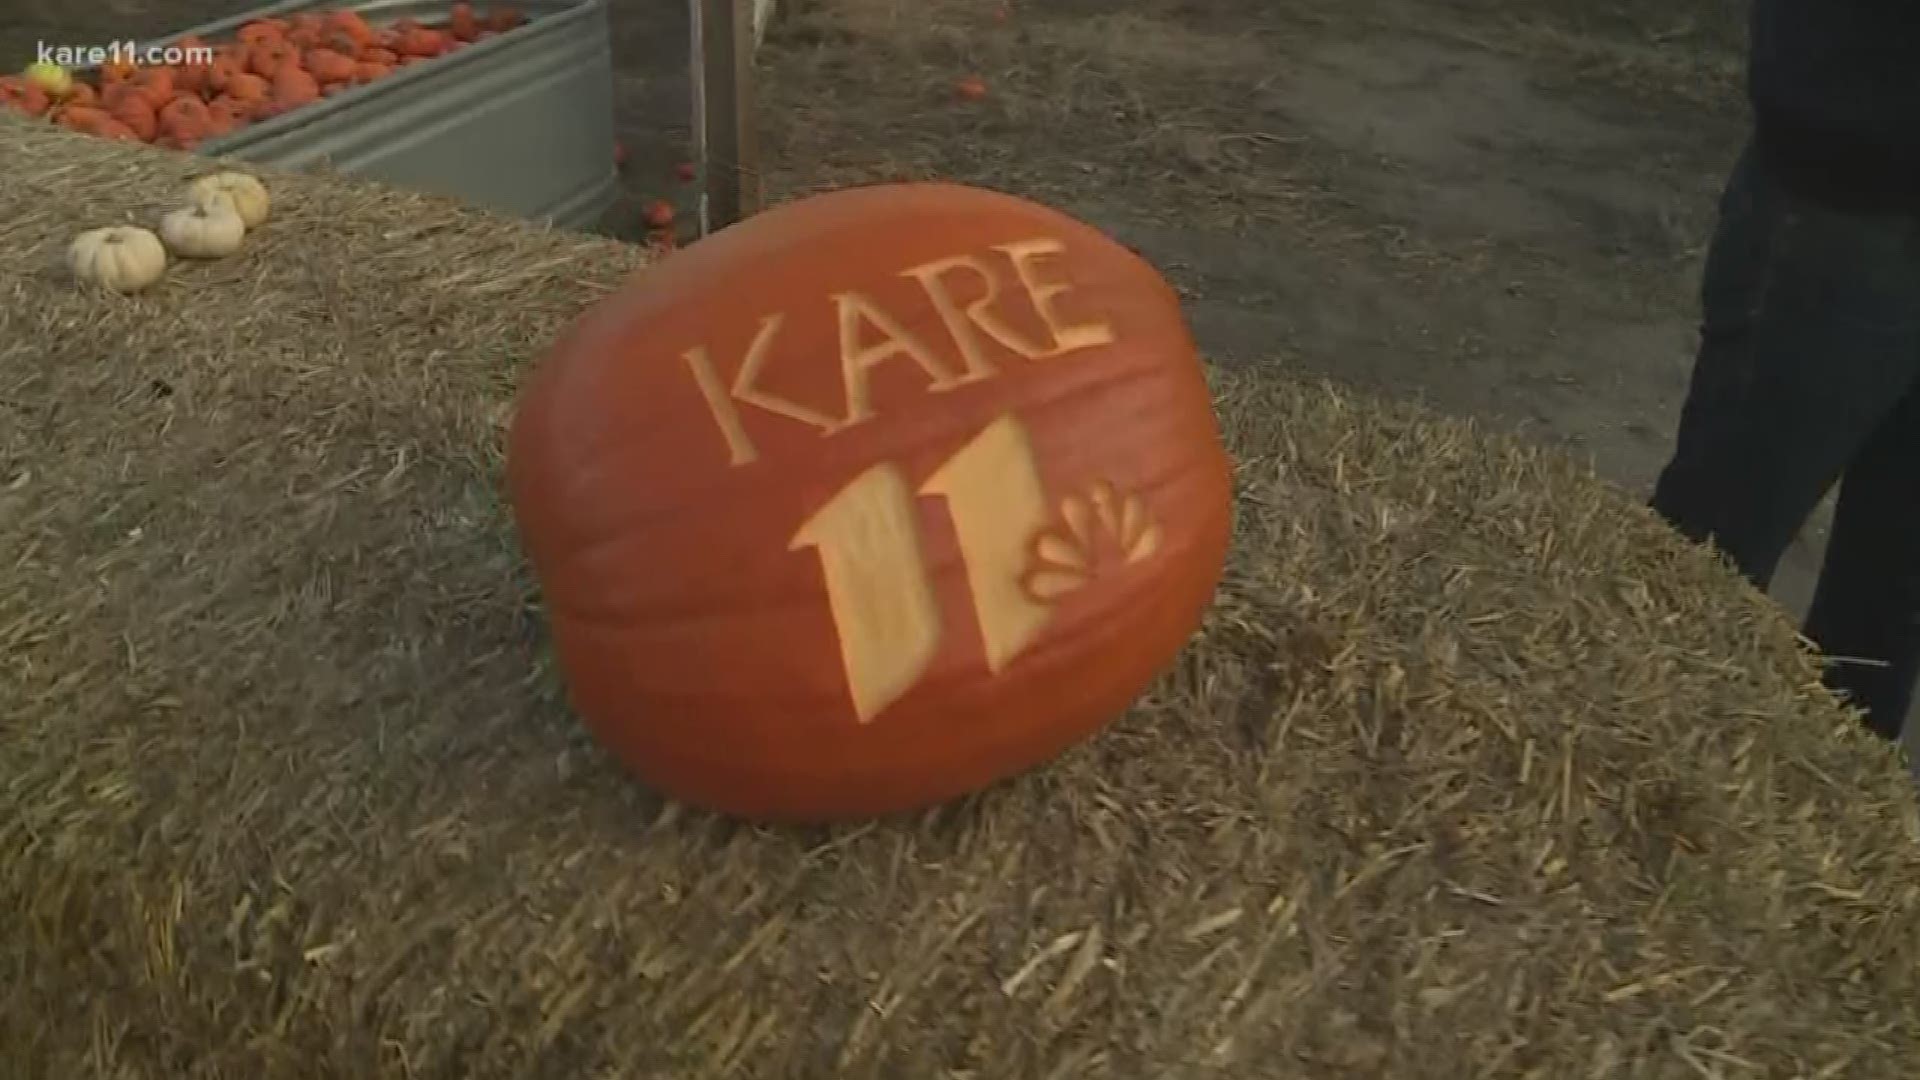 Minnesota's largest corn maze can be found in the northwest metro on Highway 169 in Brooklyn Park. This year's maze includes a giant slide and a pumpkin slinger. Kent Erdahl gave them both a try on KARE 11 Saturday.